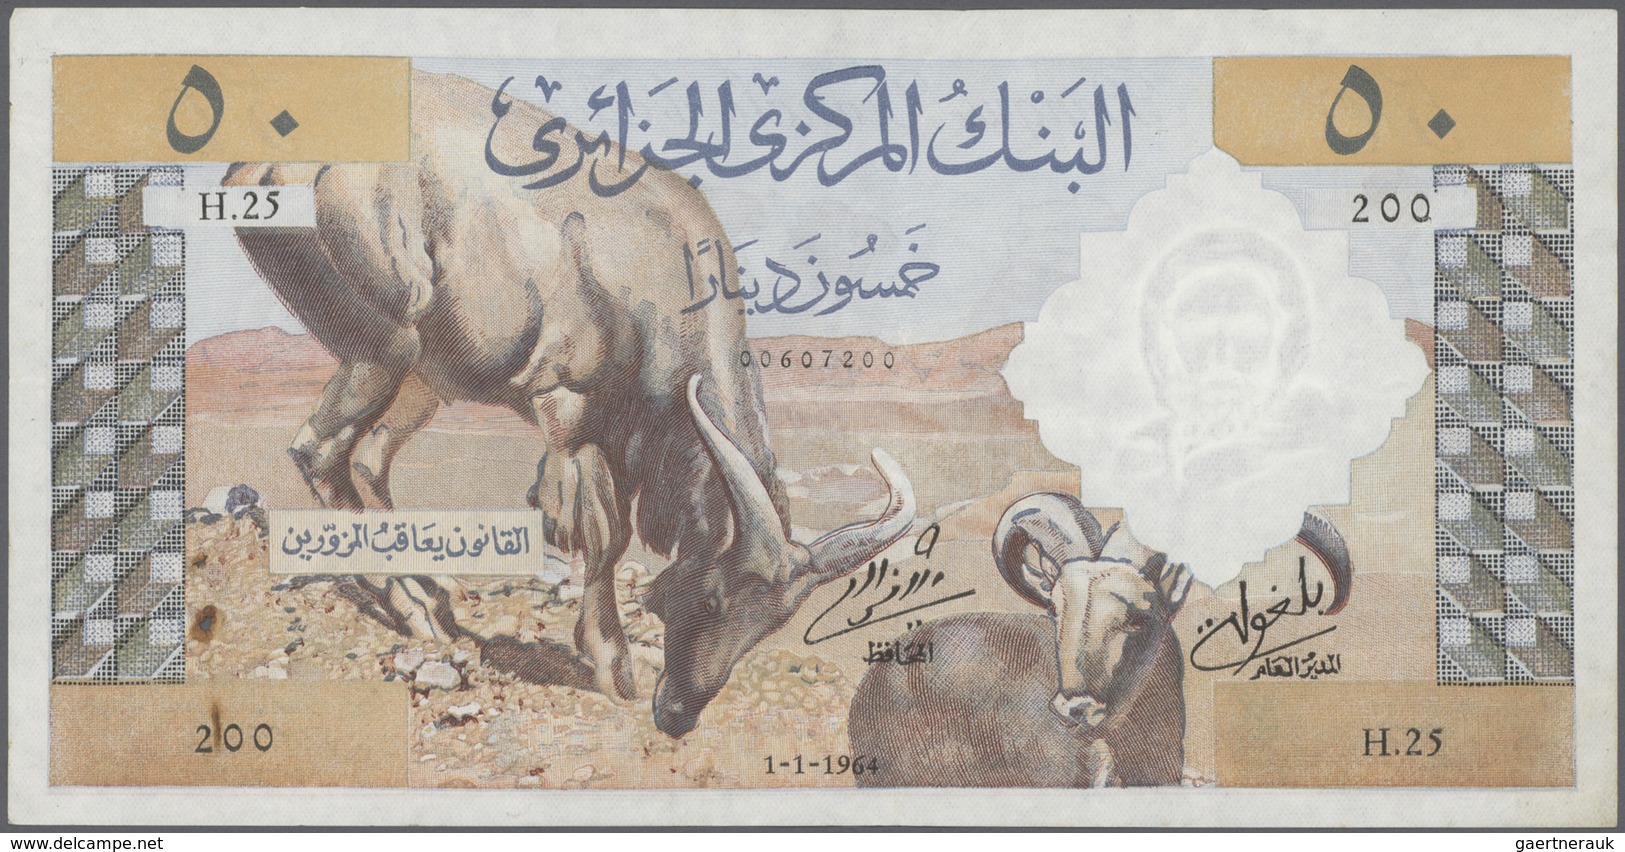 Algeria / Algerien: Set Of 2 Notes 50 Dinars 1964 P. 124, Both In Lightly Used Condition, Not Washed - Algerije